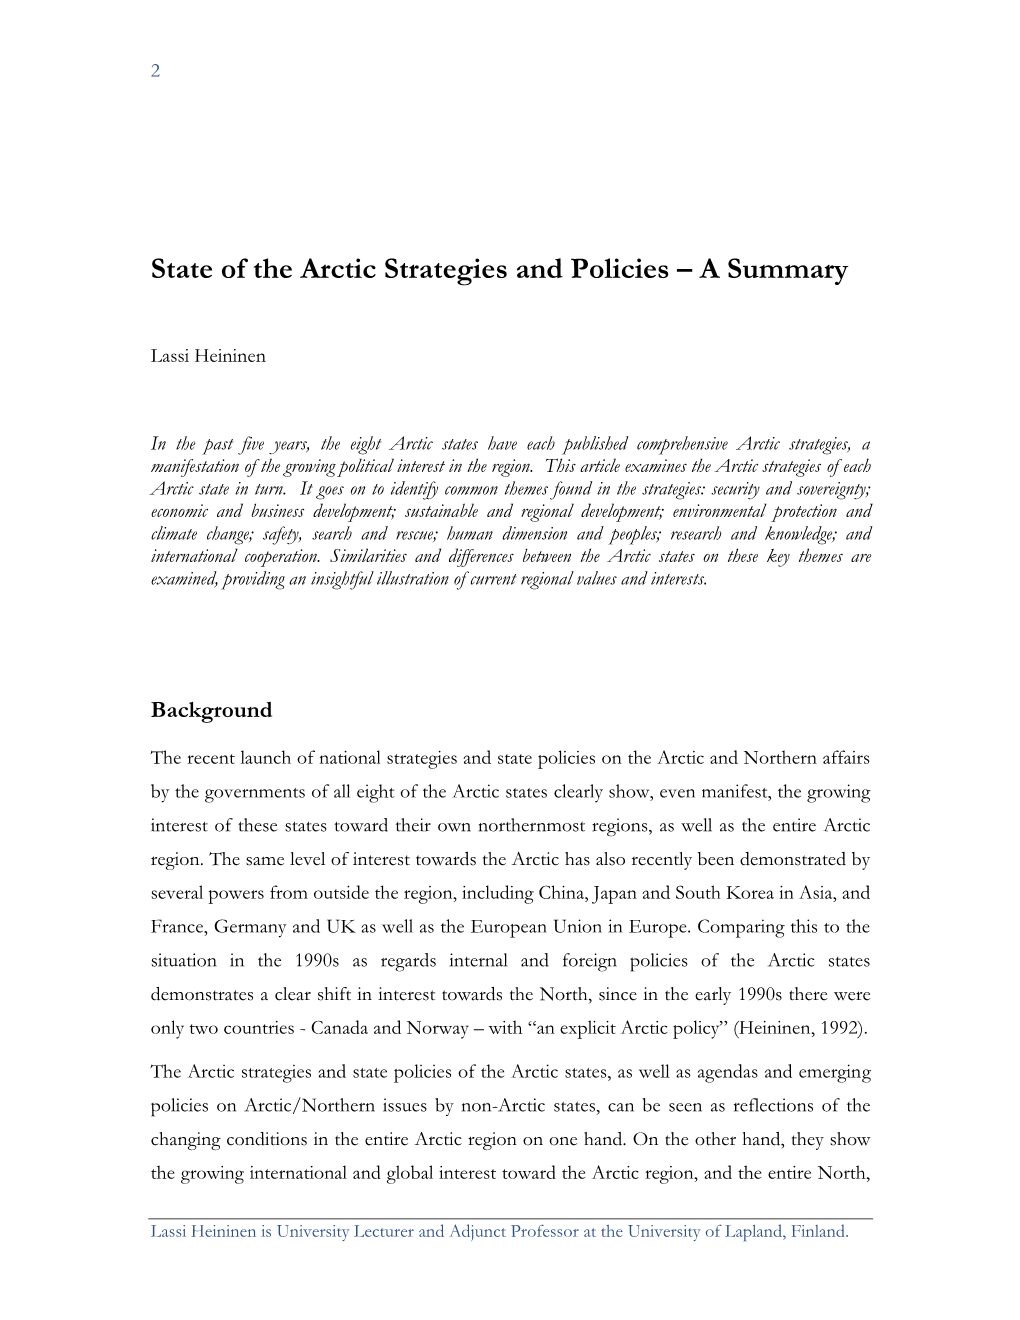 State of the Arctic Strategies and Policies – a Summary